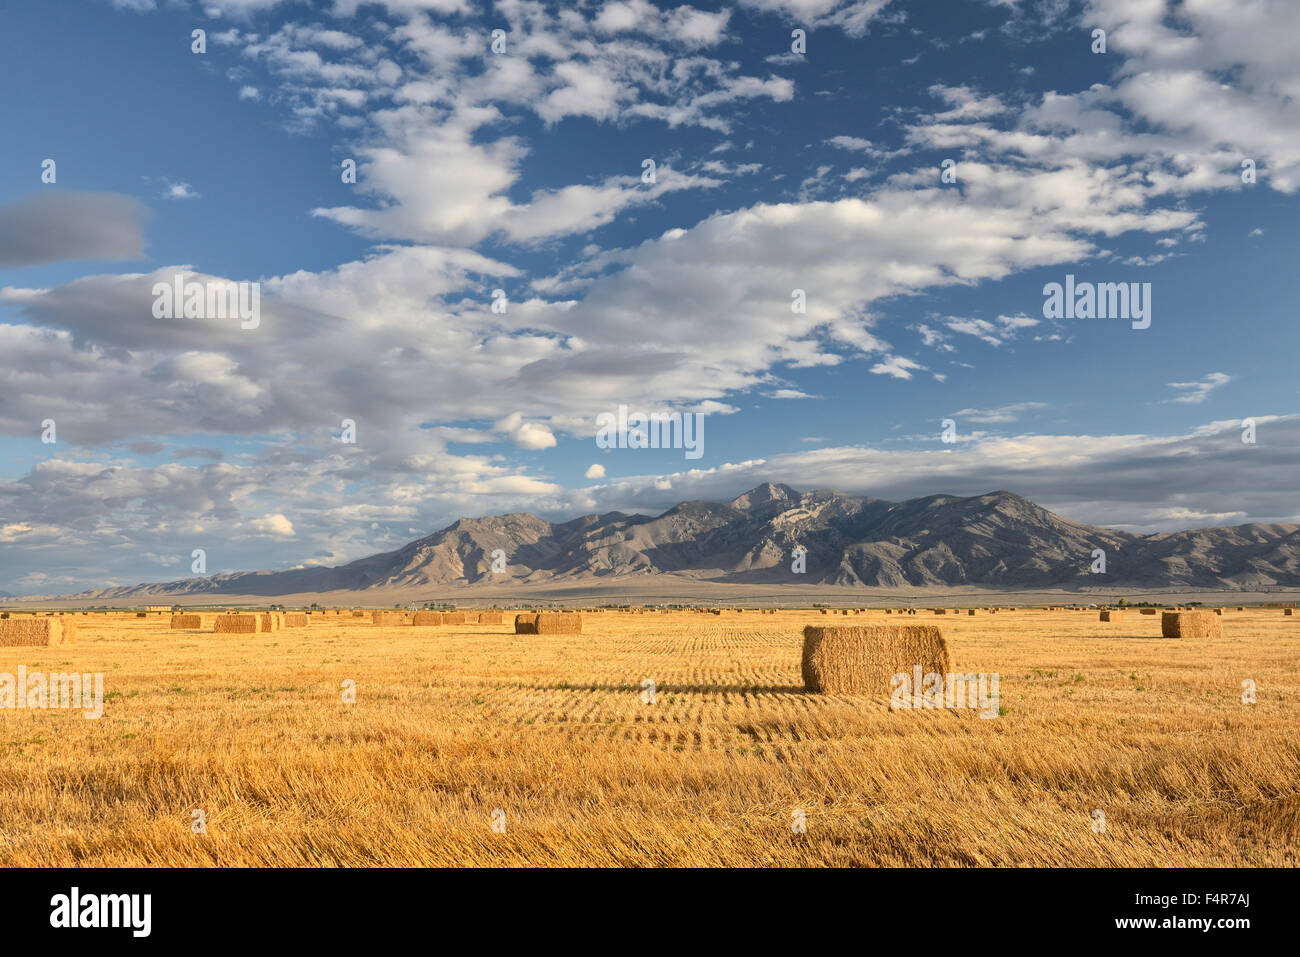 America, West, Western, USA, United States, America, Idaho, field, straw, wheat, landscape, agriculture Stock Photo